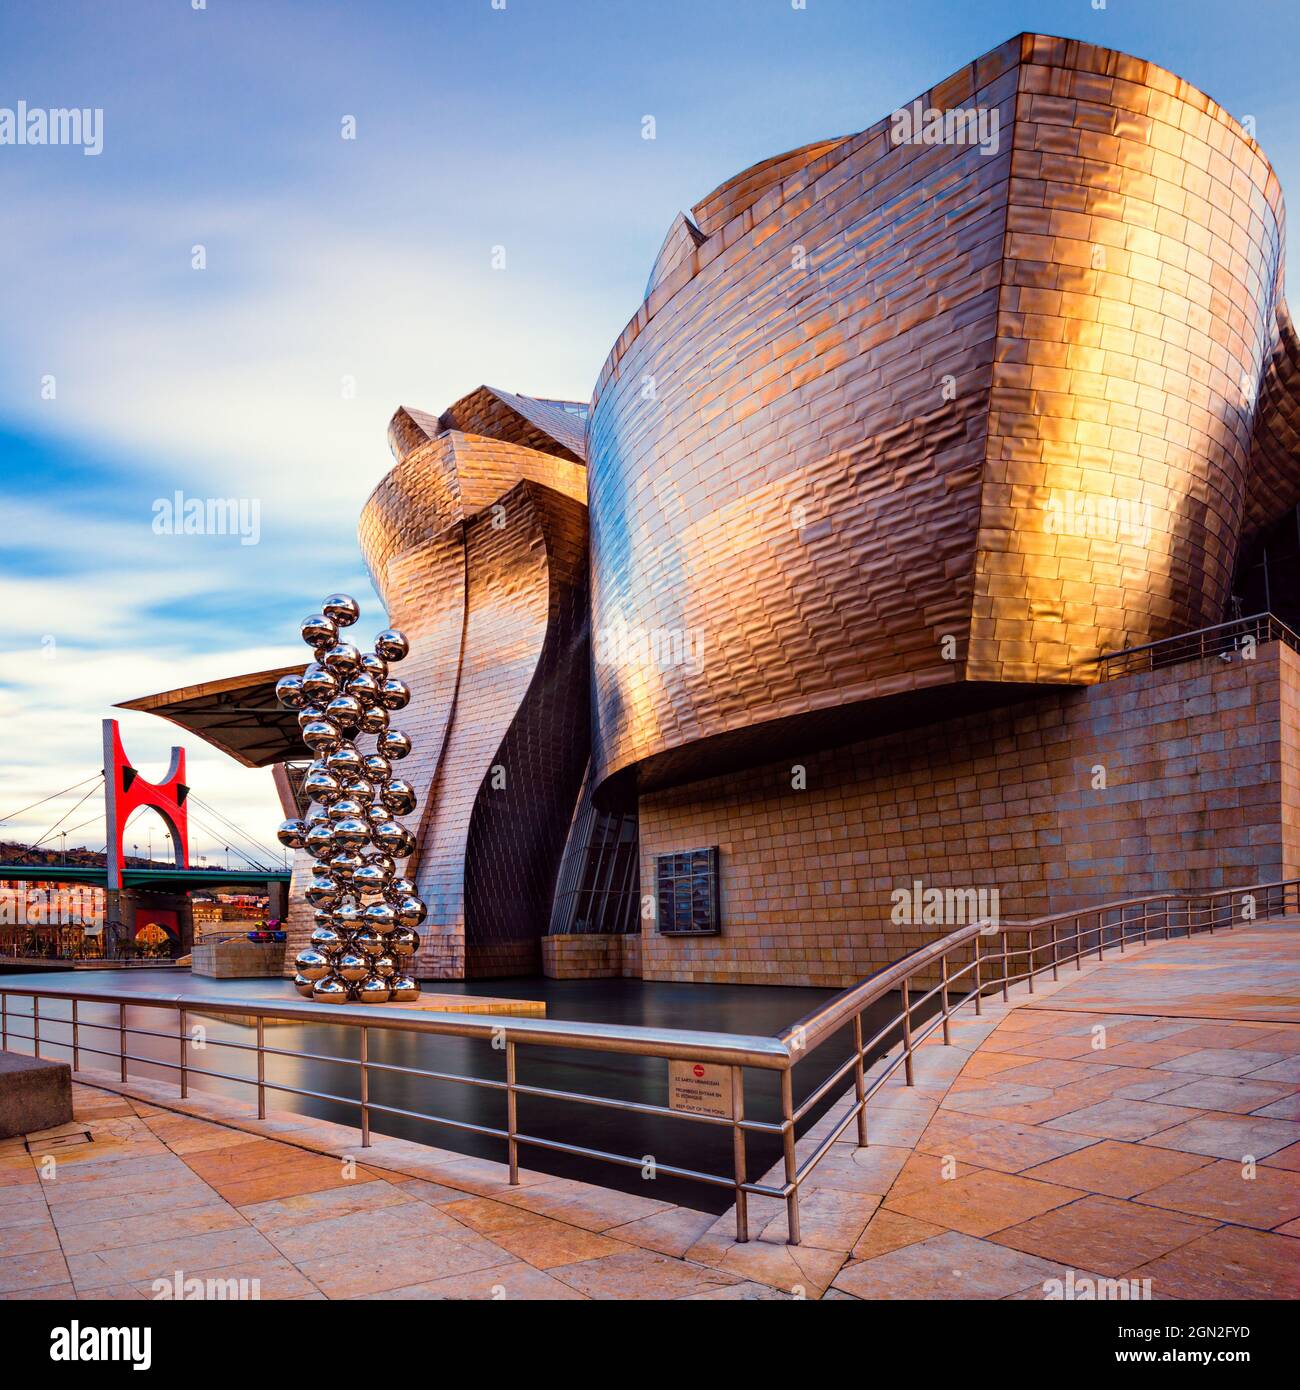 SPAIN, SPANISH BASQUE COUNTRY. BISCAY. BILBAO. THE GUGGENHEIM MUSEUM IN BILBAO, WITH THE SCULPTURE THE BIG TREE AND THE EYE (ARTIST ANISH KAPOOR) AND Stock Photo